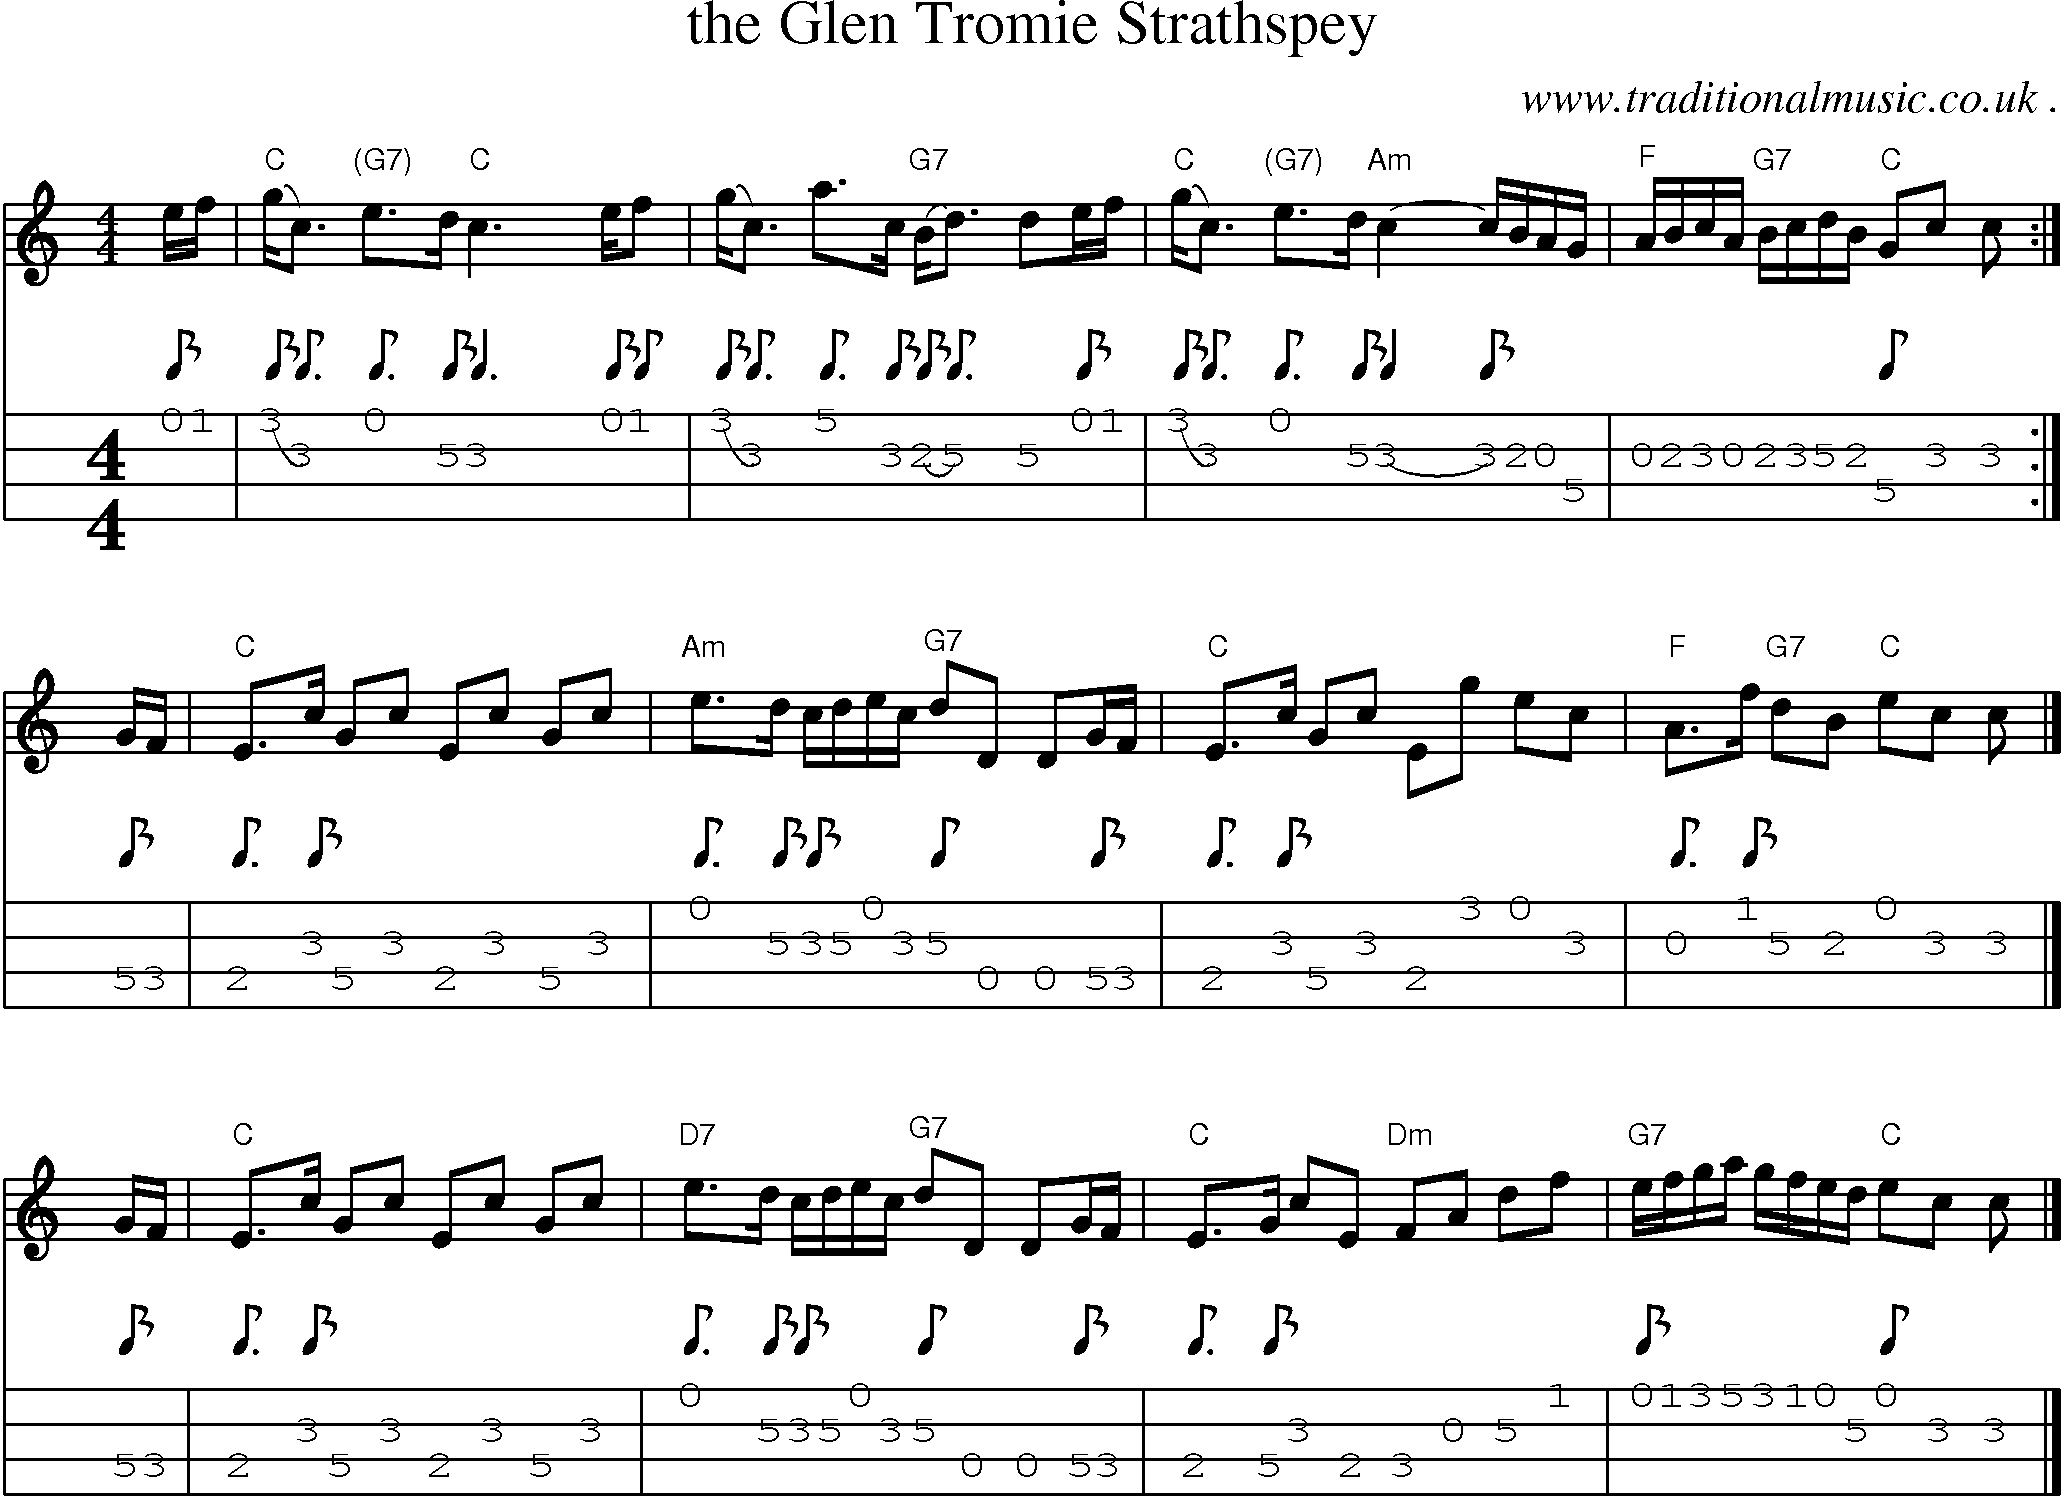 Sheet-music  score, Chords and Mandolin Tabs for The Glen Tromie Strathspey